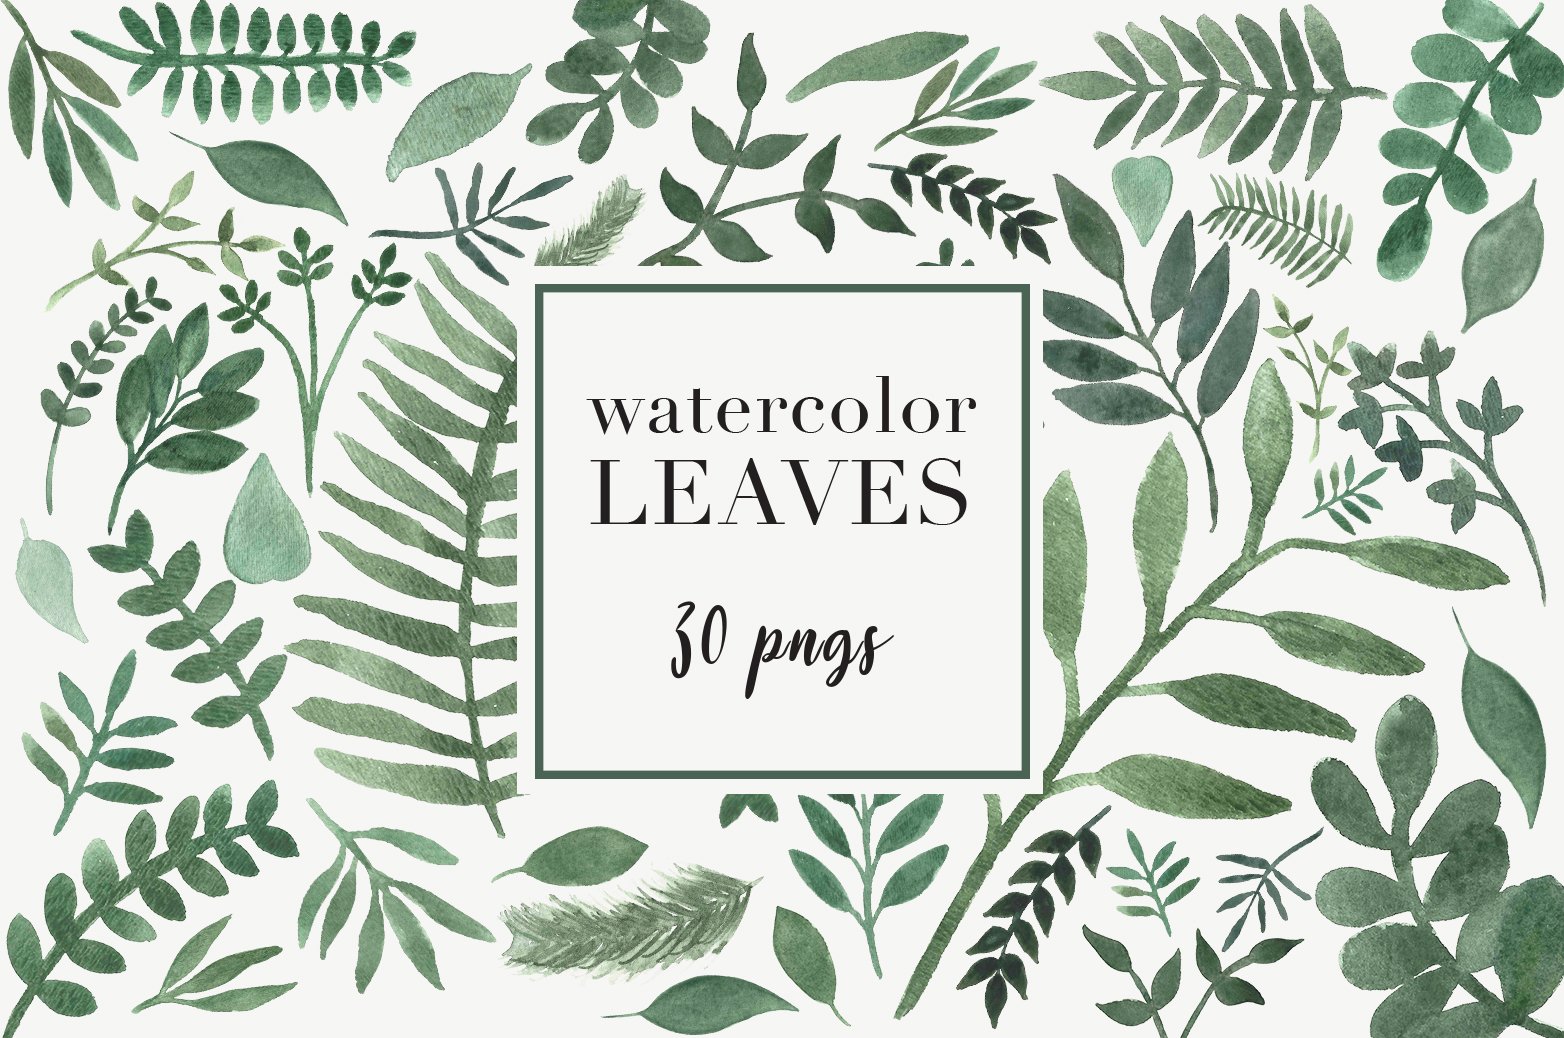 Watercolor leaves with a square frame on a white background.